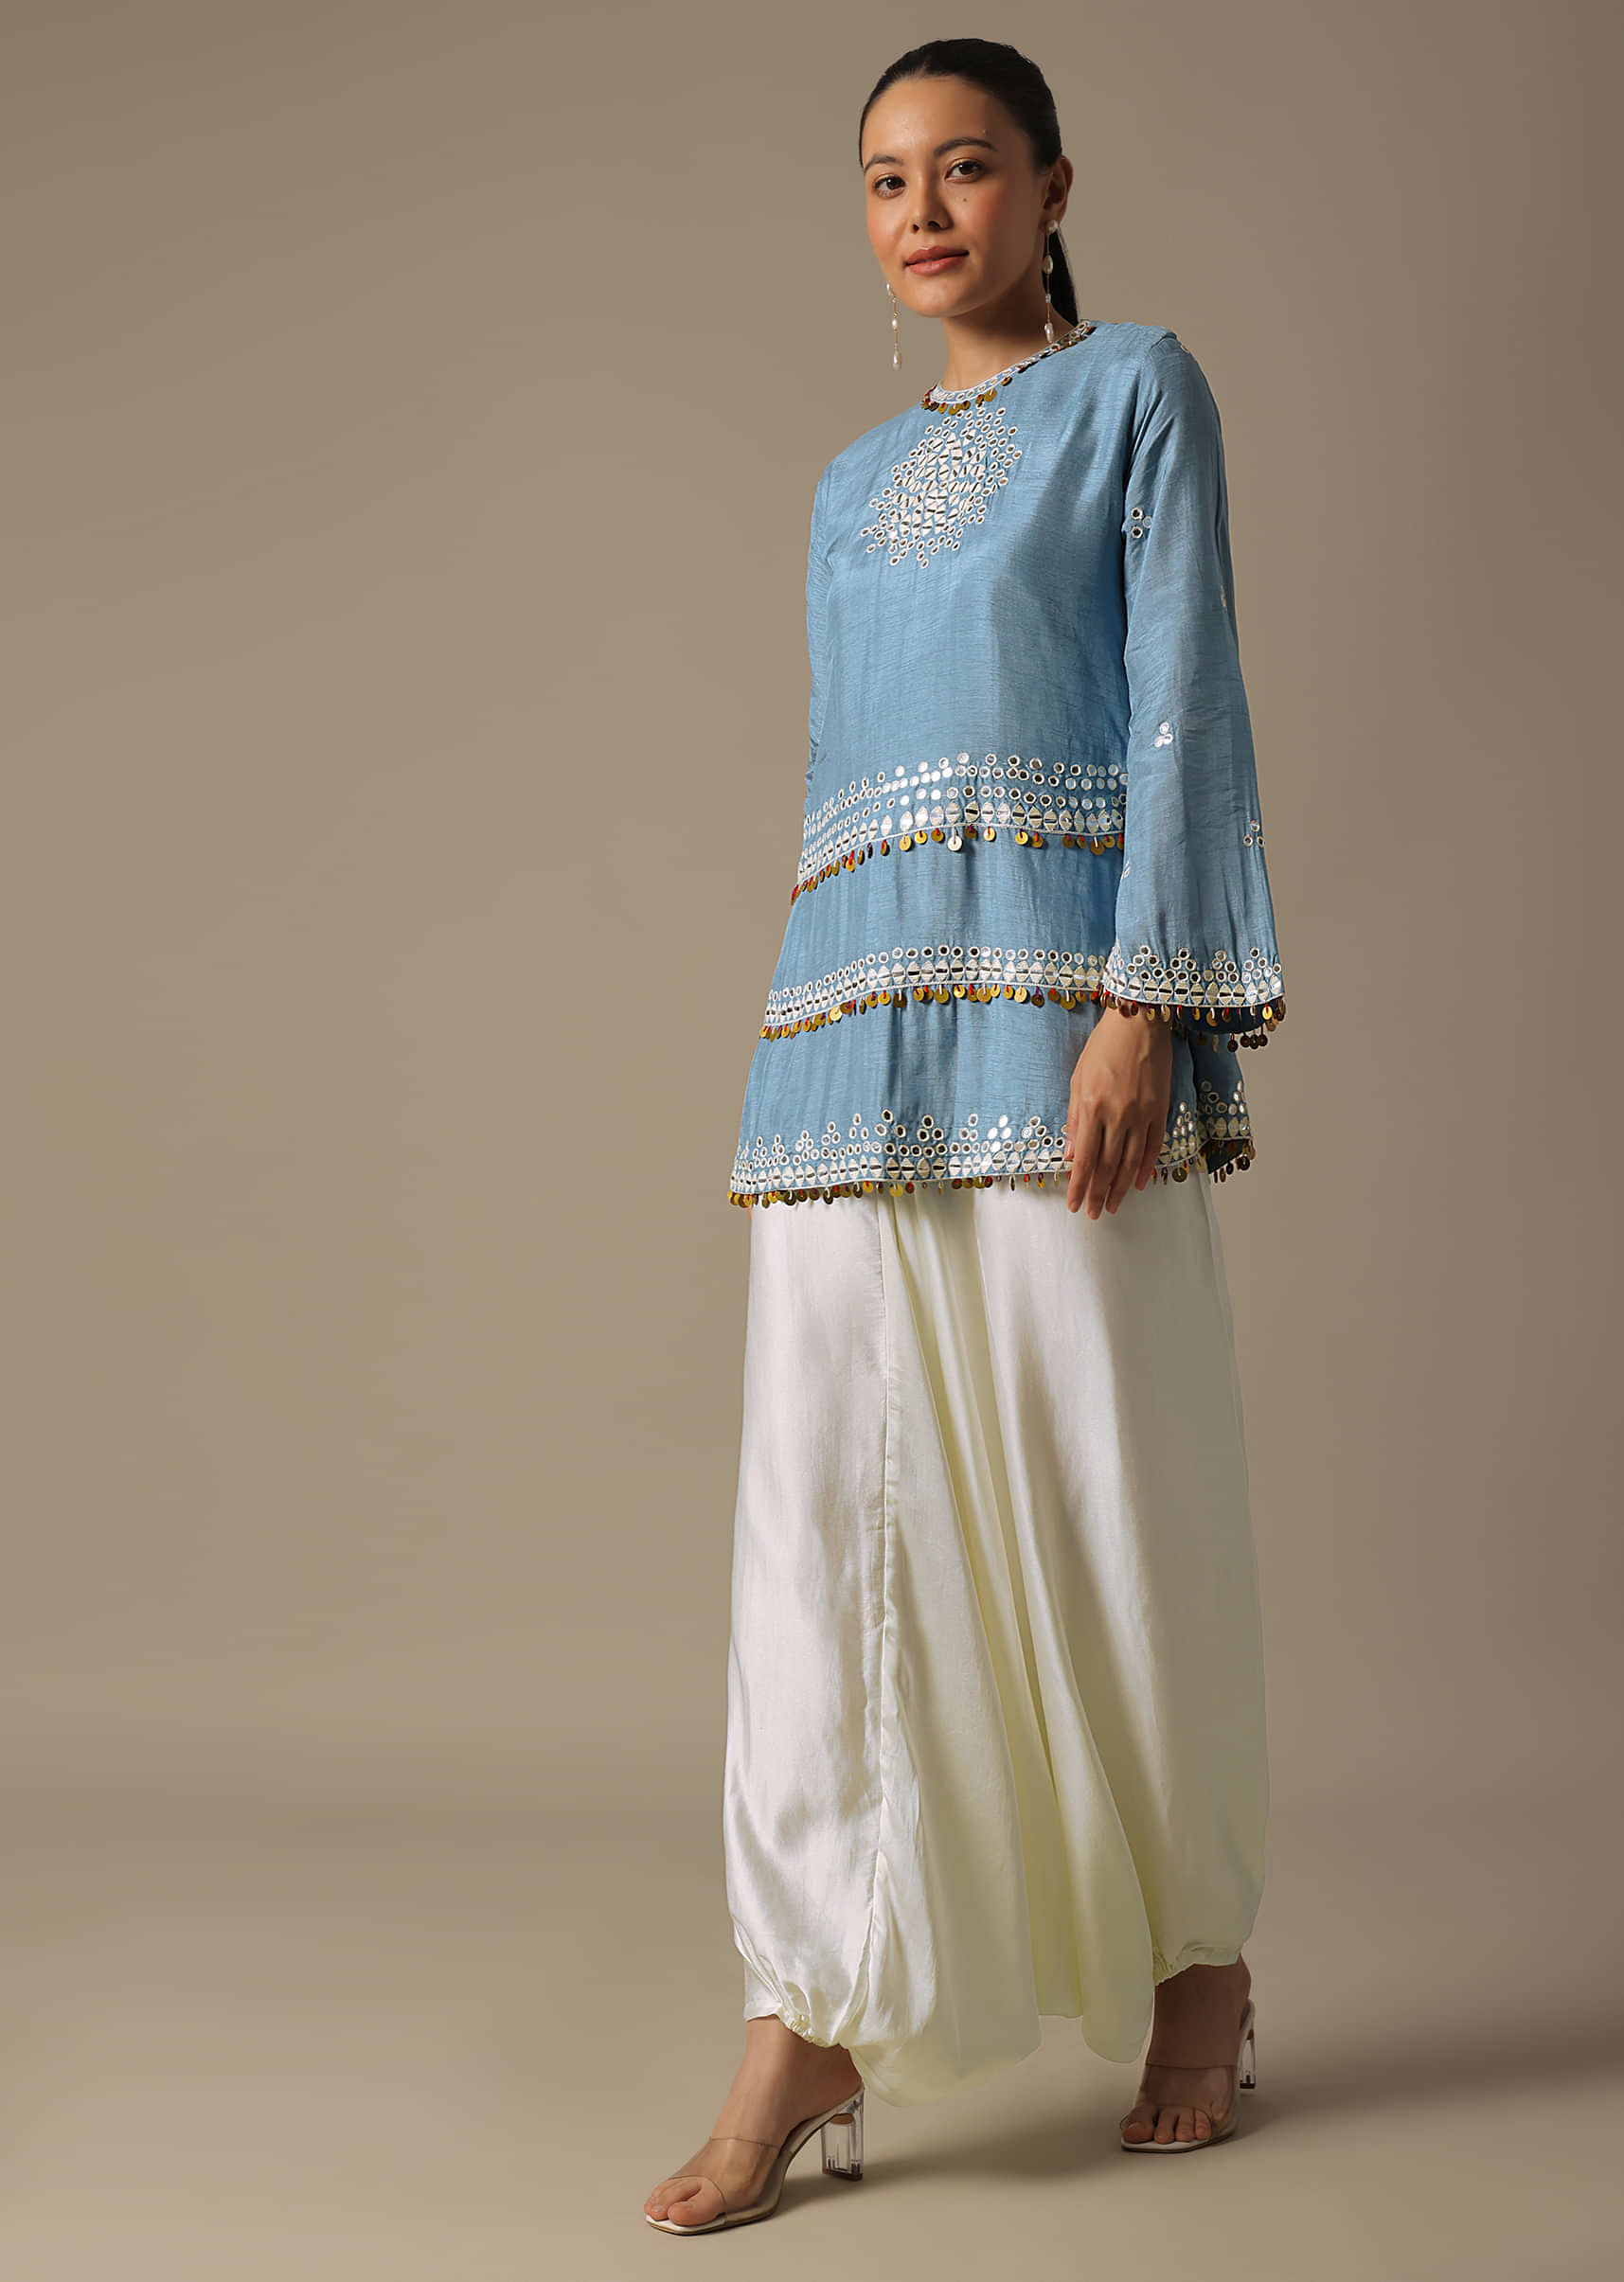 Blue Indica Mirror Dhoti Skirt Set Paired With Bralette and Cape